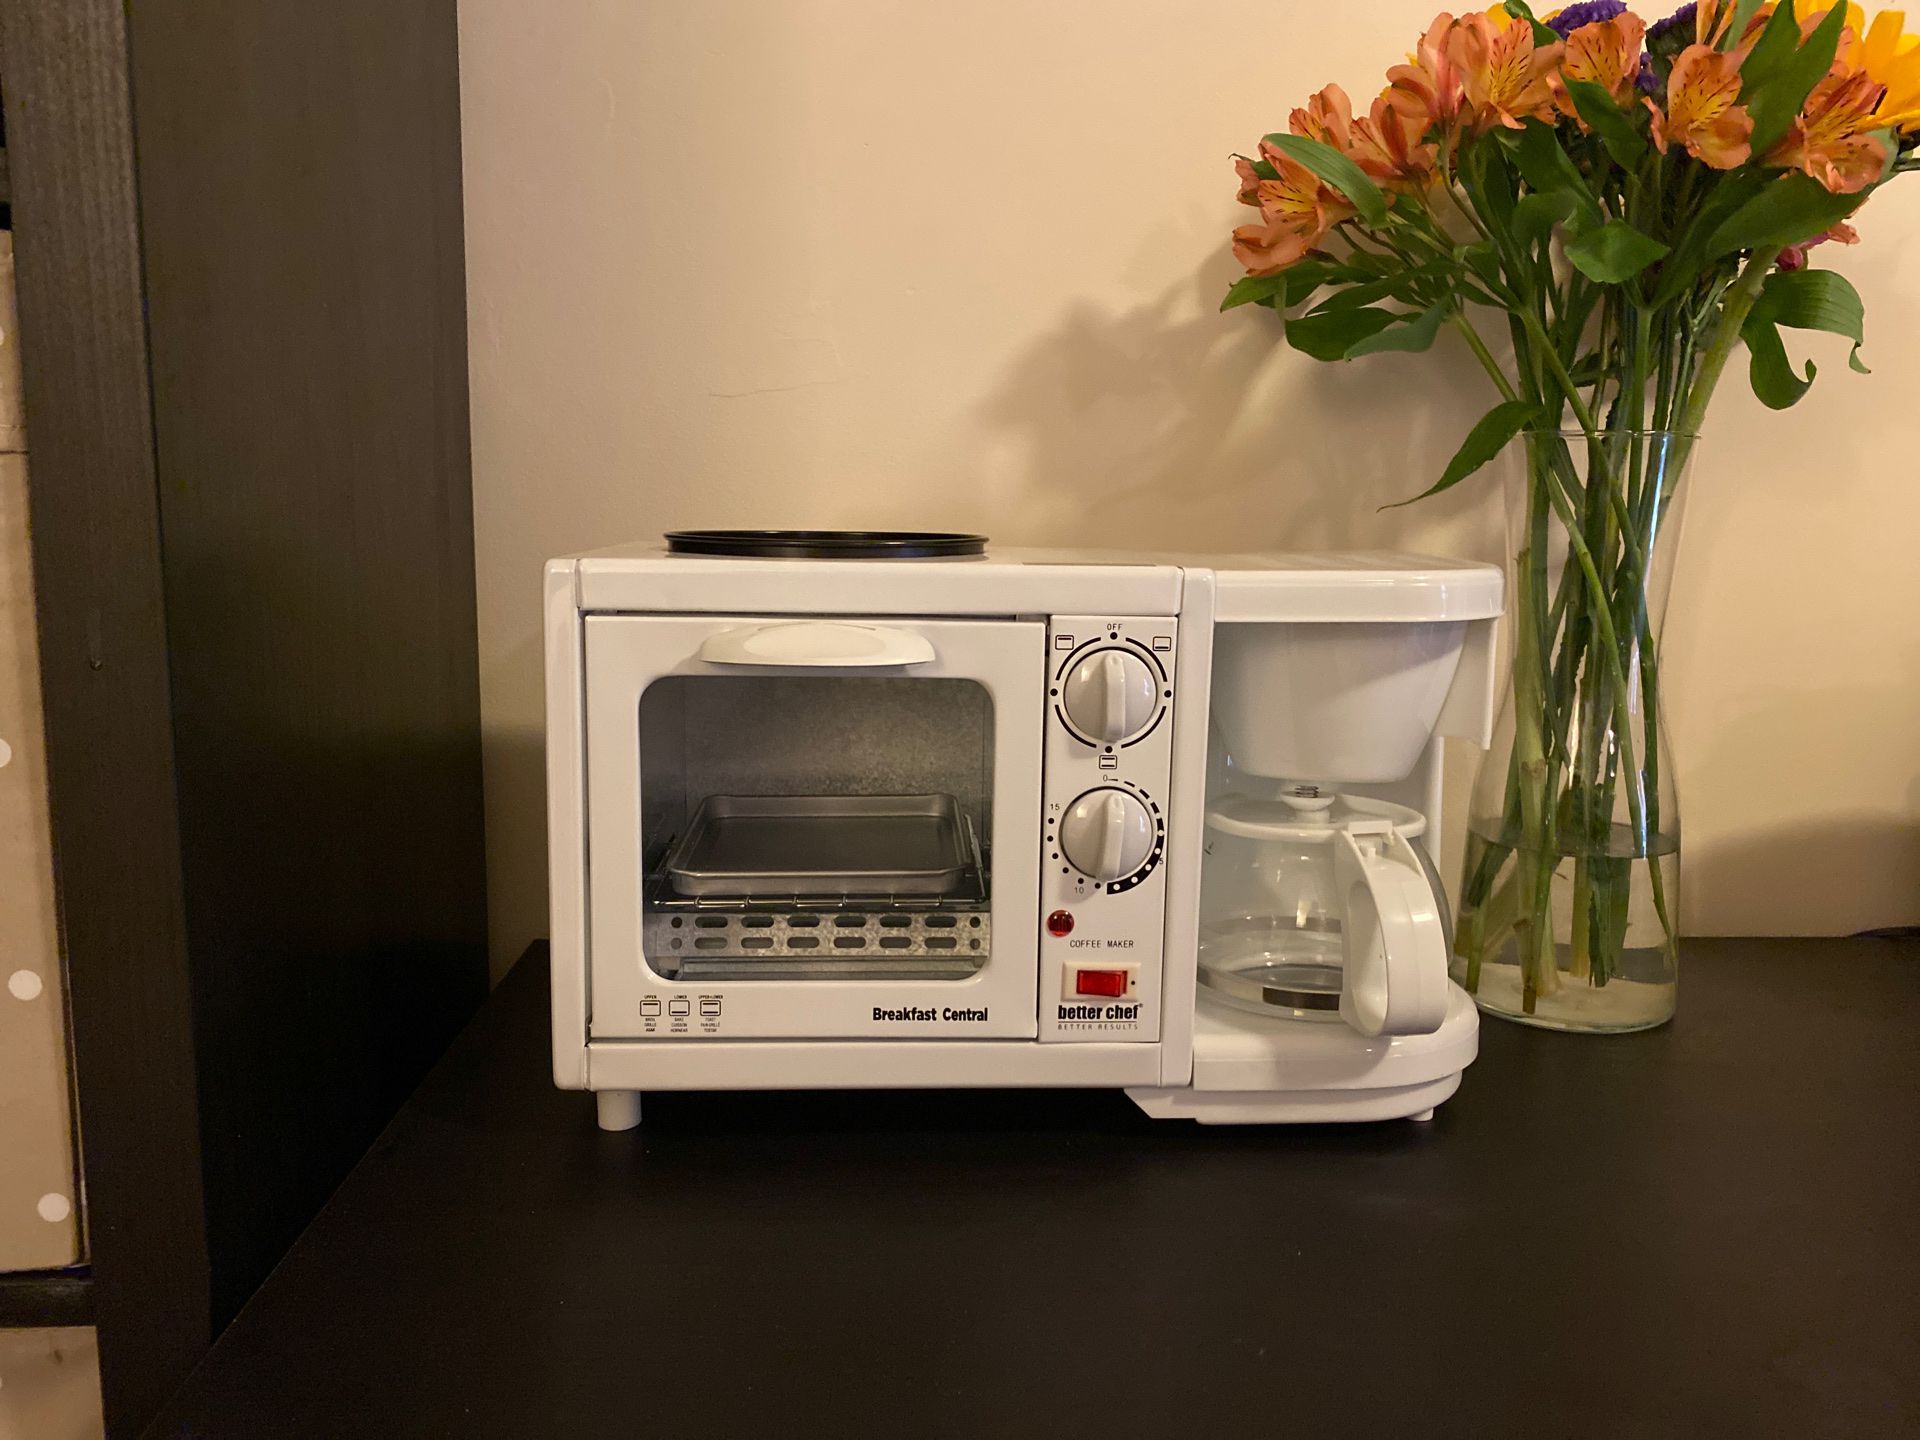 Oven/ coffee maker